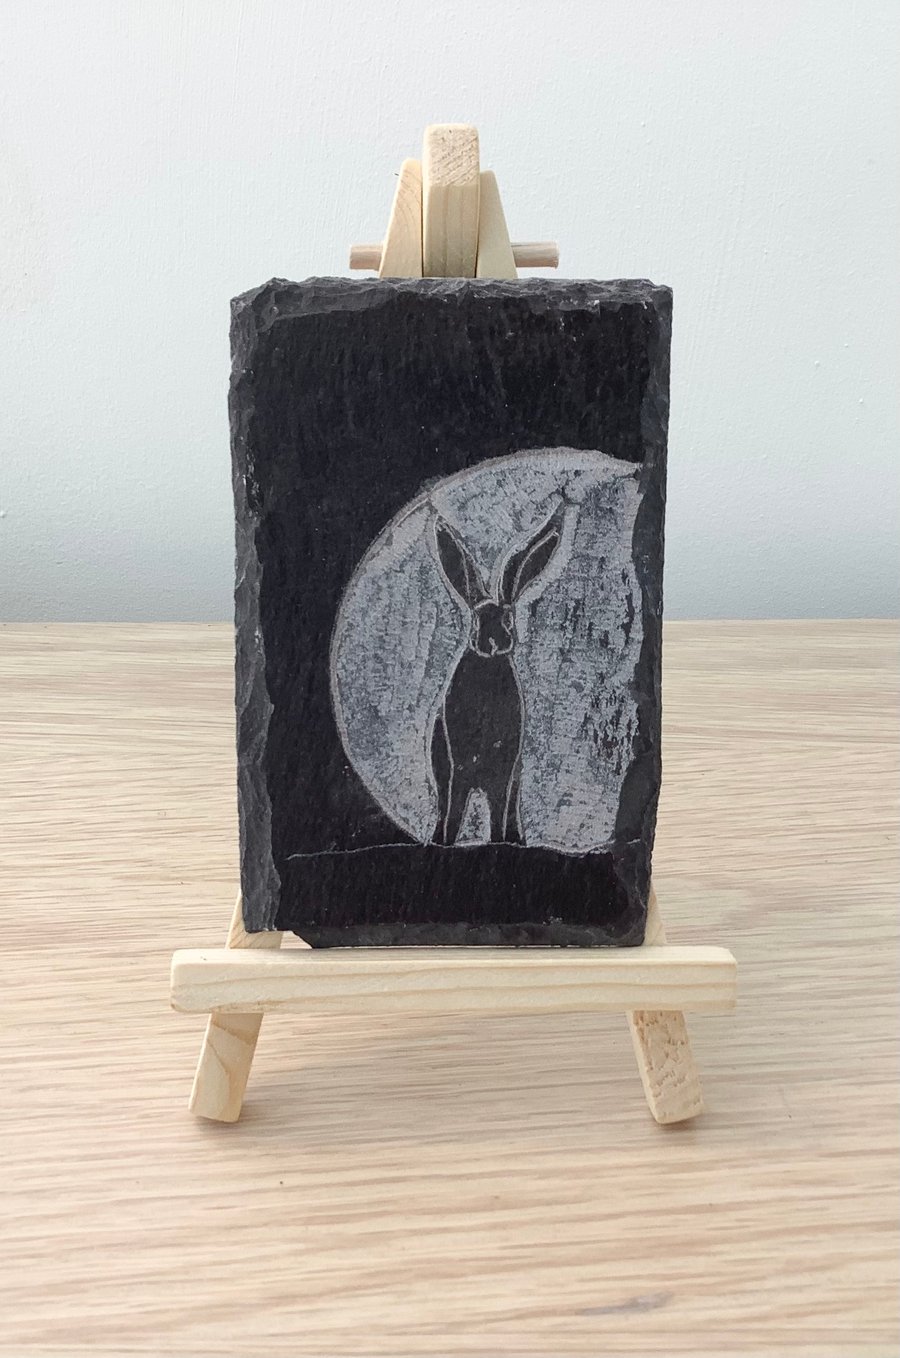 A cute hare in front of the moon - original art hand carved on recycled slate